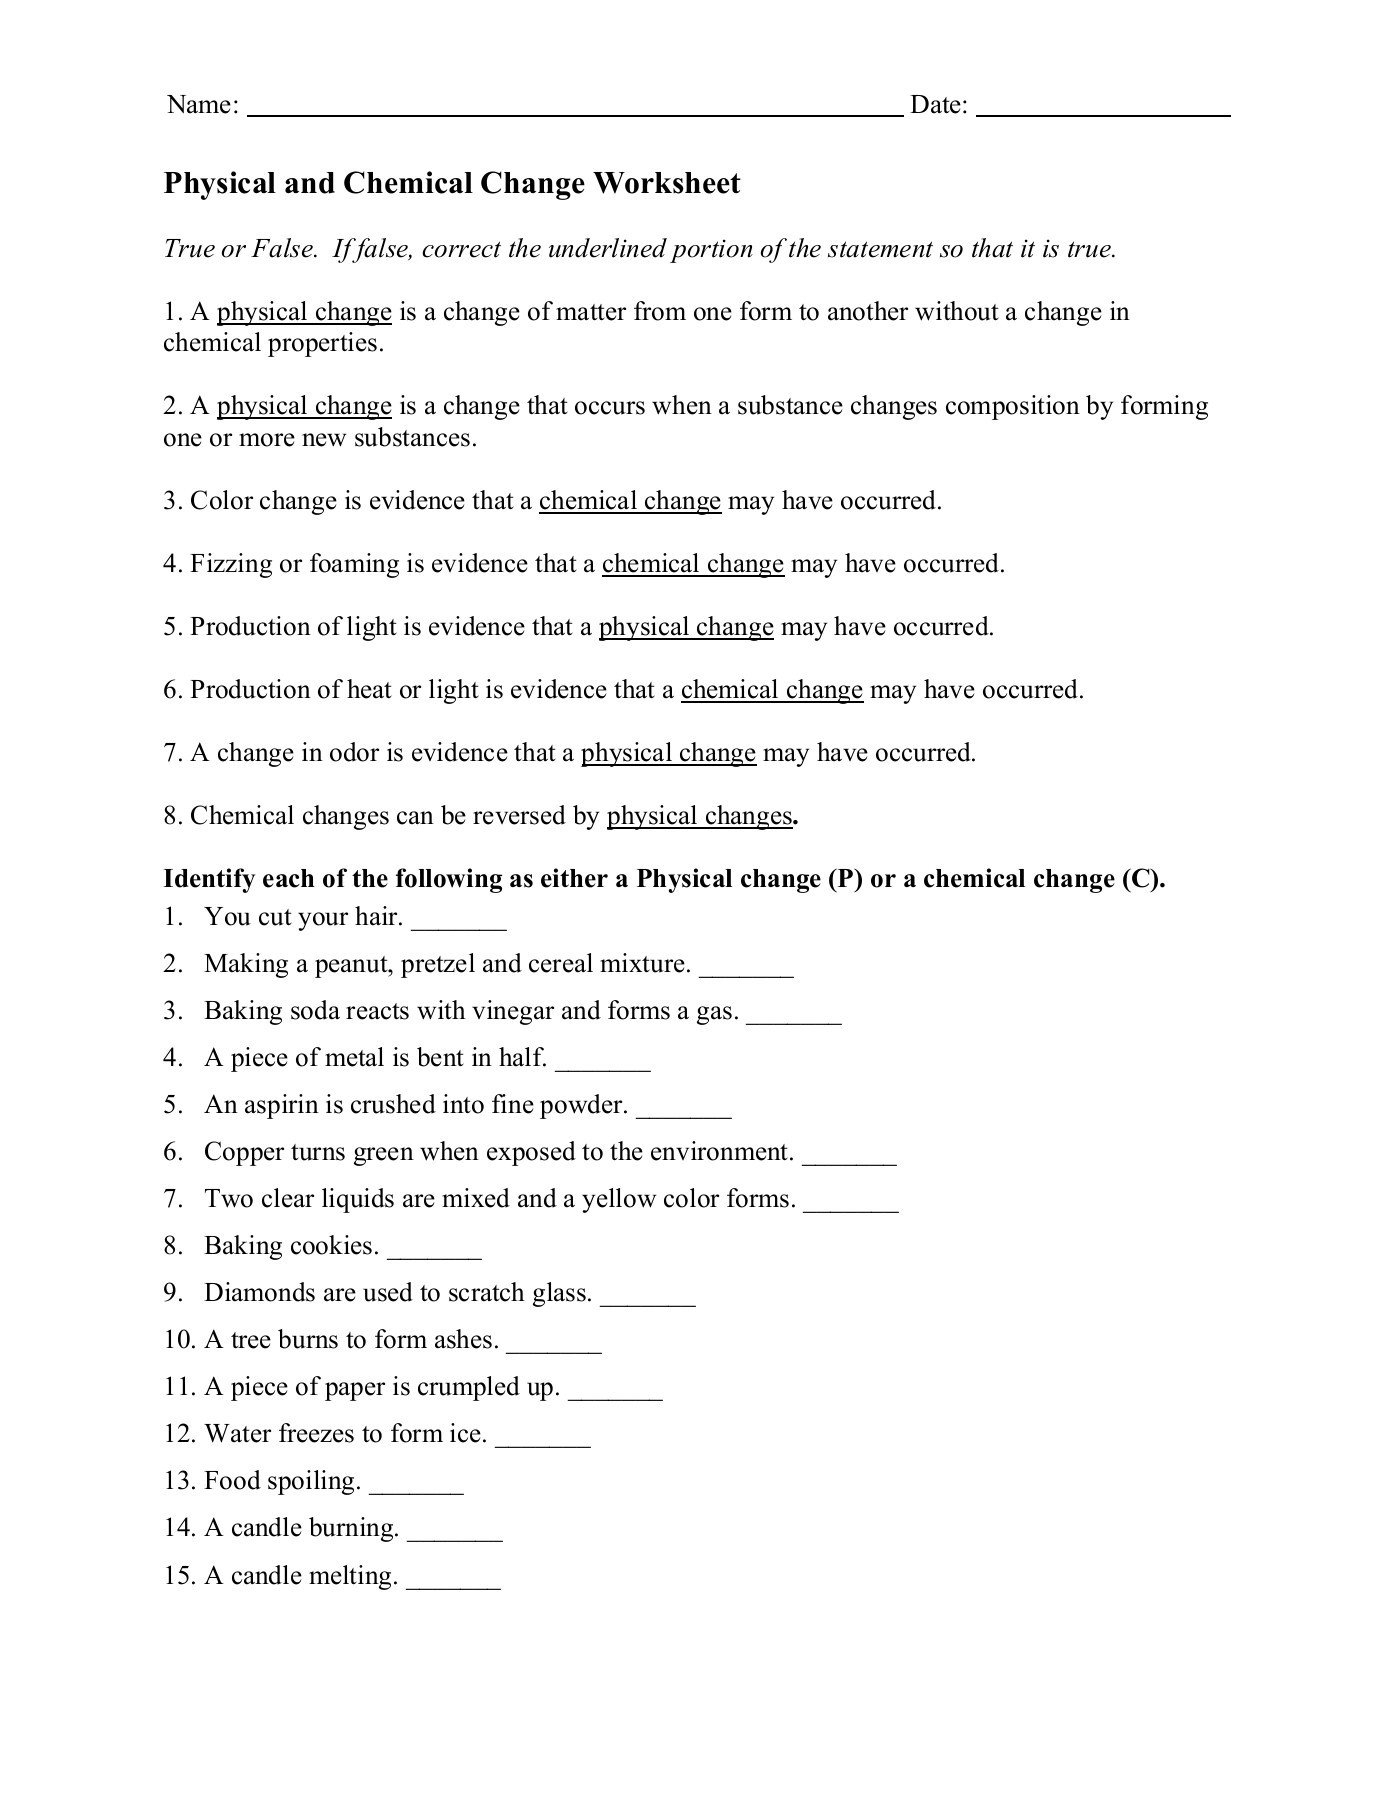 Physical And Chemical Change Worksheet Intended For Physical And Chemical Changes Worksheet